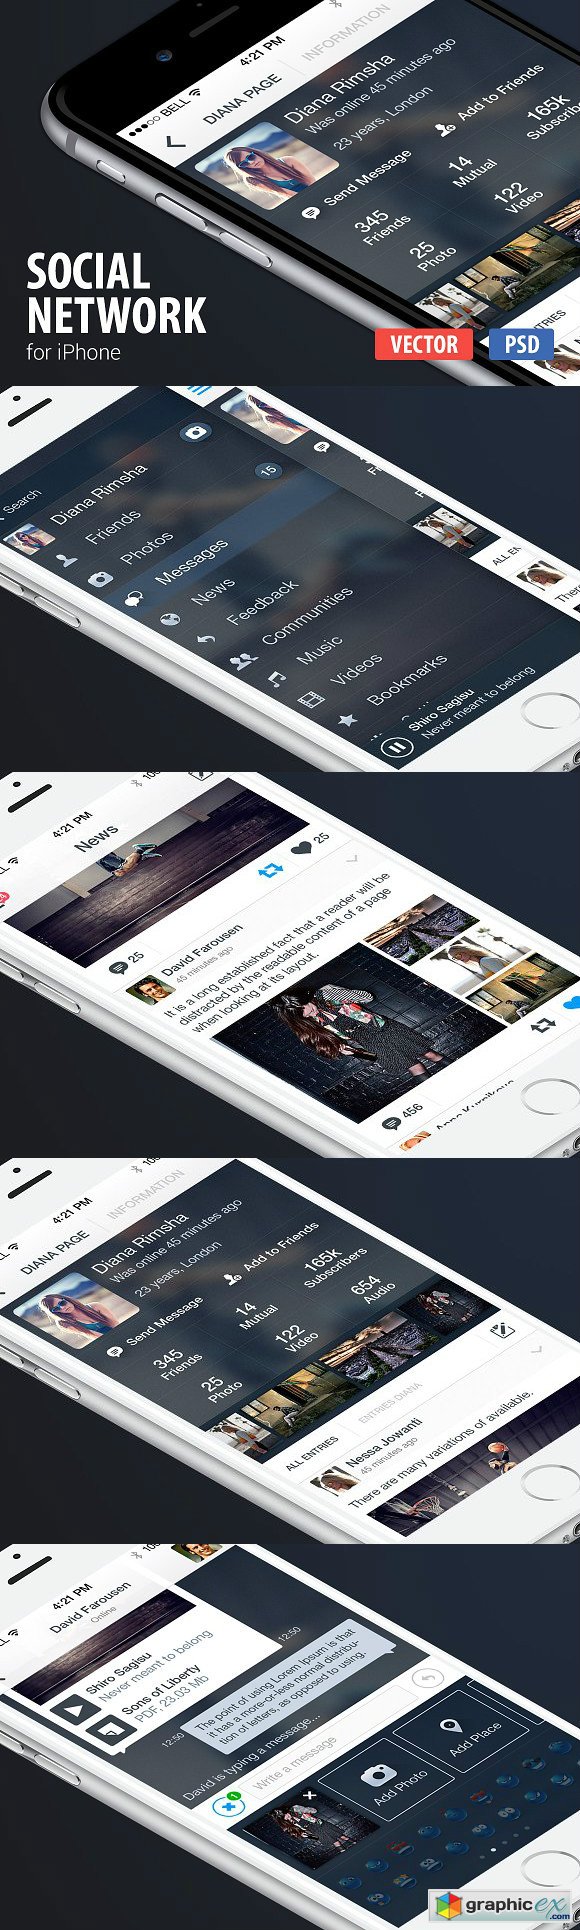 Social Network for iPhone